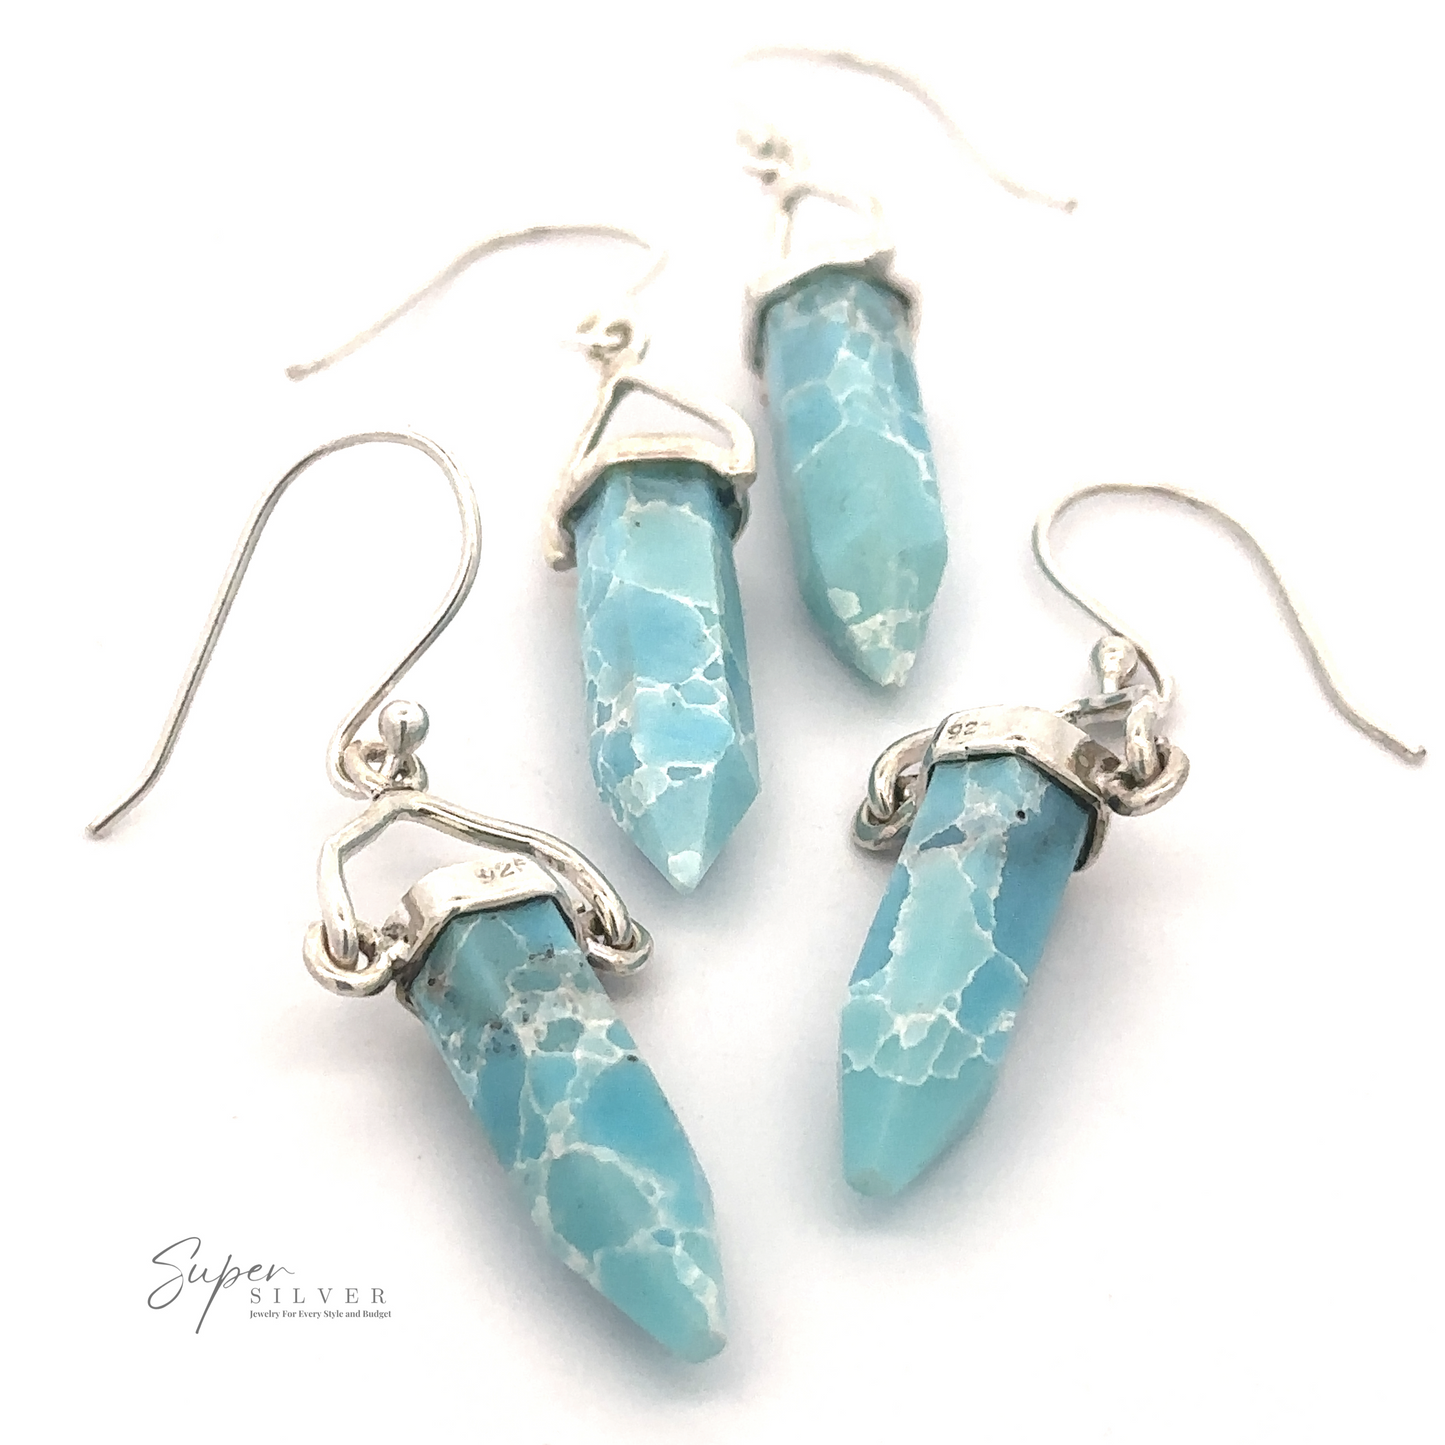 
                  
                    A pair of Obelisk Shape Raw Larimar Earrings in sterling silver settings, displayed on a white background with the "Super Silver" logo in the corner.
                  
                